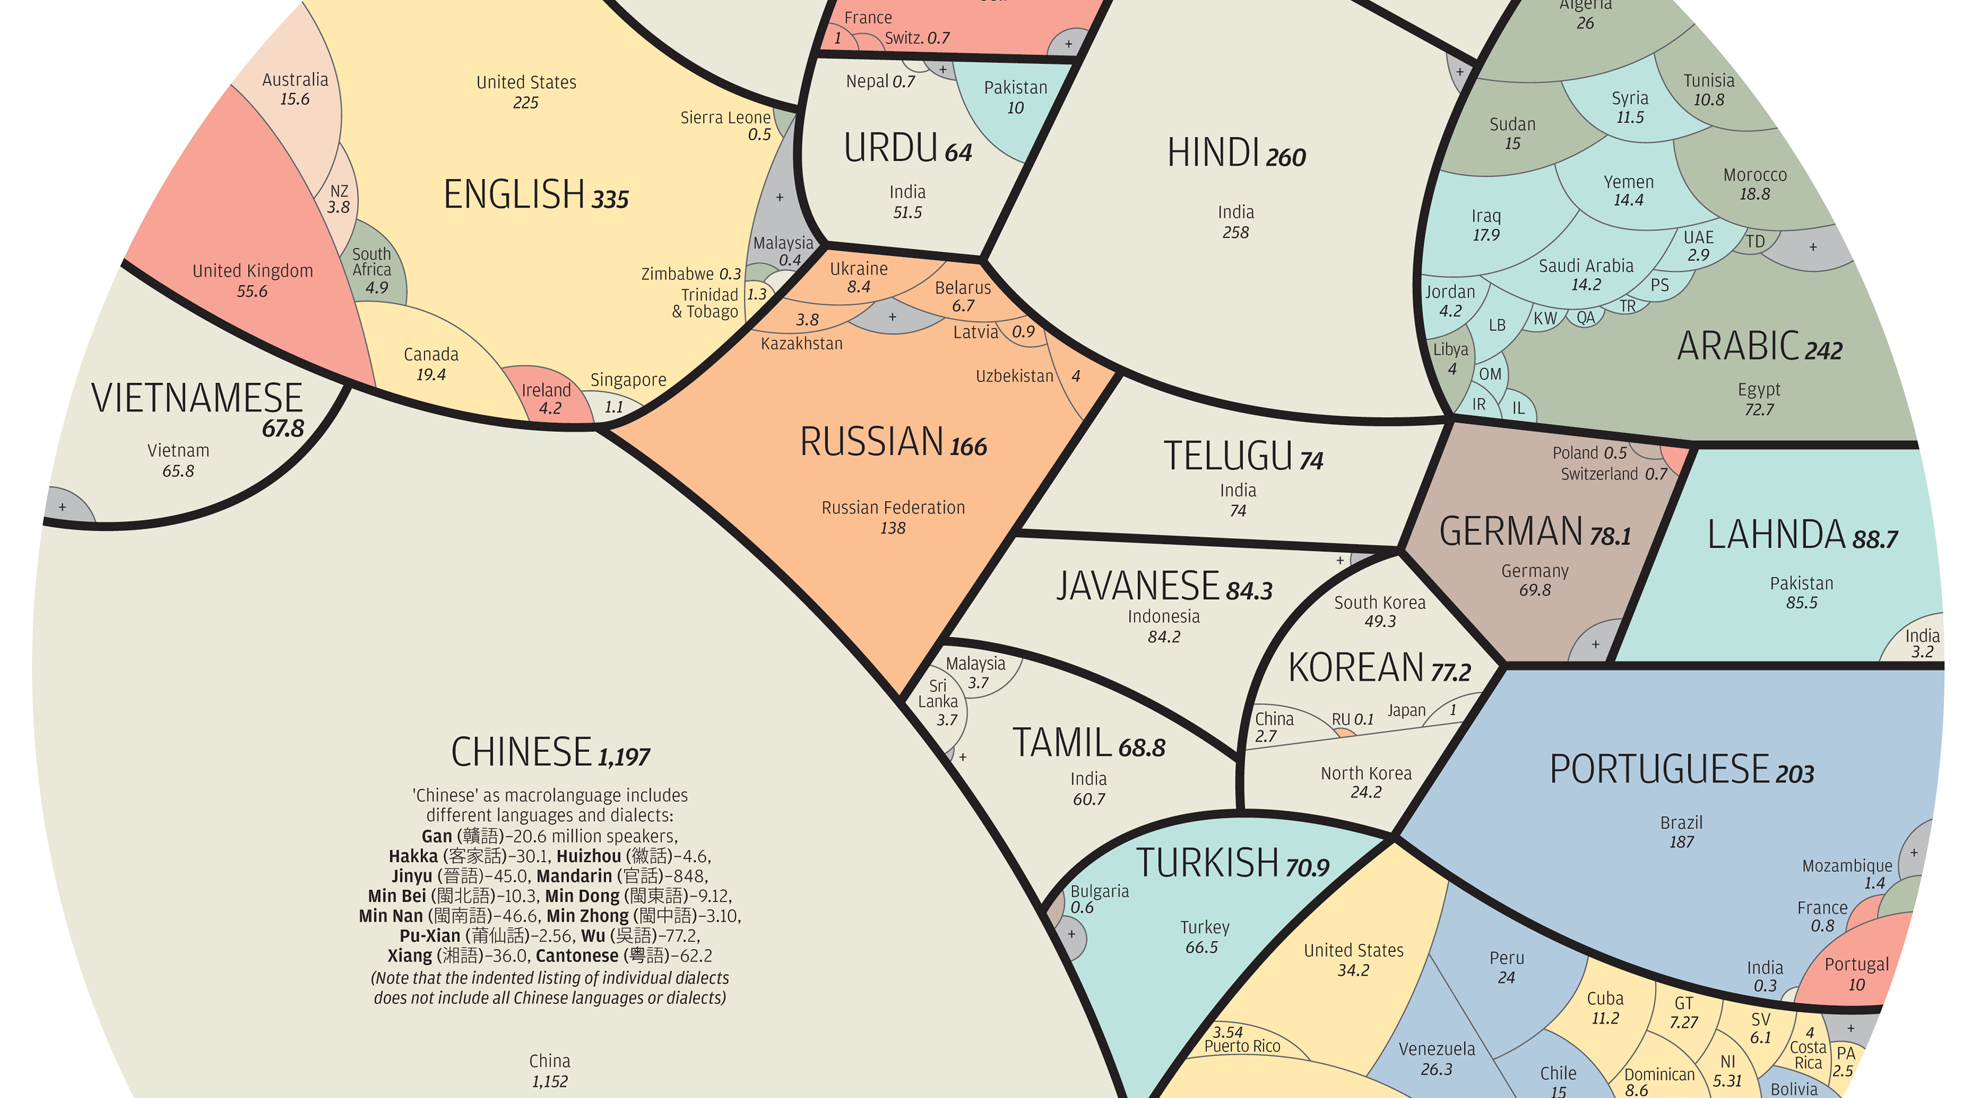 [B!] All World Languages in One Visualization